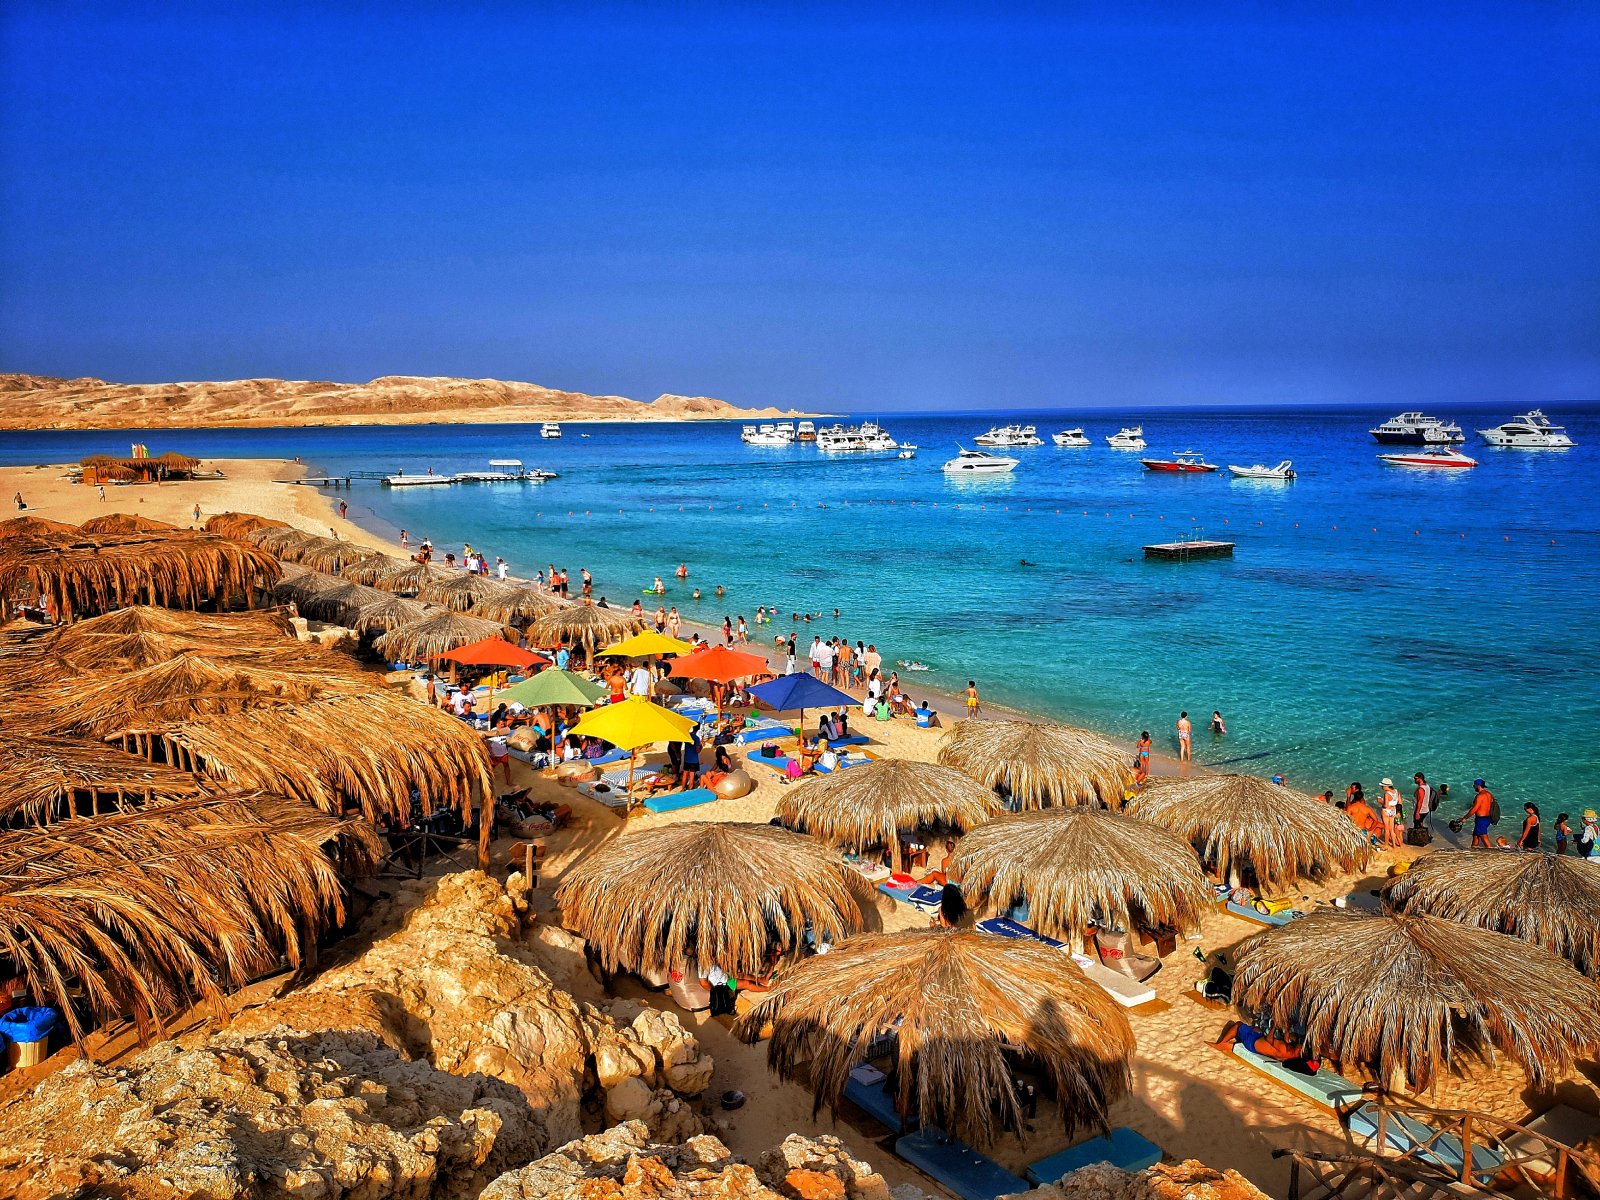 <p class="wp-caption-text">Image Credit: Shutterstock / ThreeA Studios</p>  <p><span>Hurghada is a resort town along the Red Sea known for its sandy beaches, clear waters, and vibrant coral reefs. It’s a popular destination for diving, snorkeling, and enjoying the seafront promenade.</span></p>